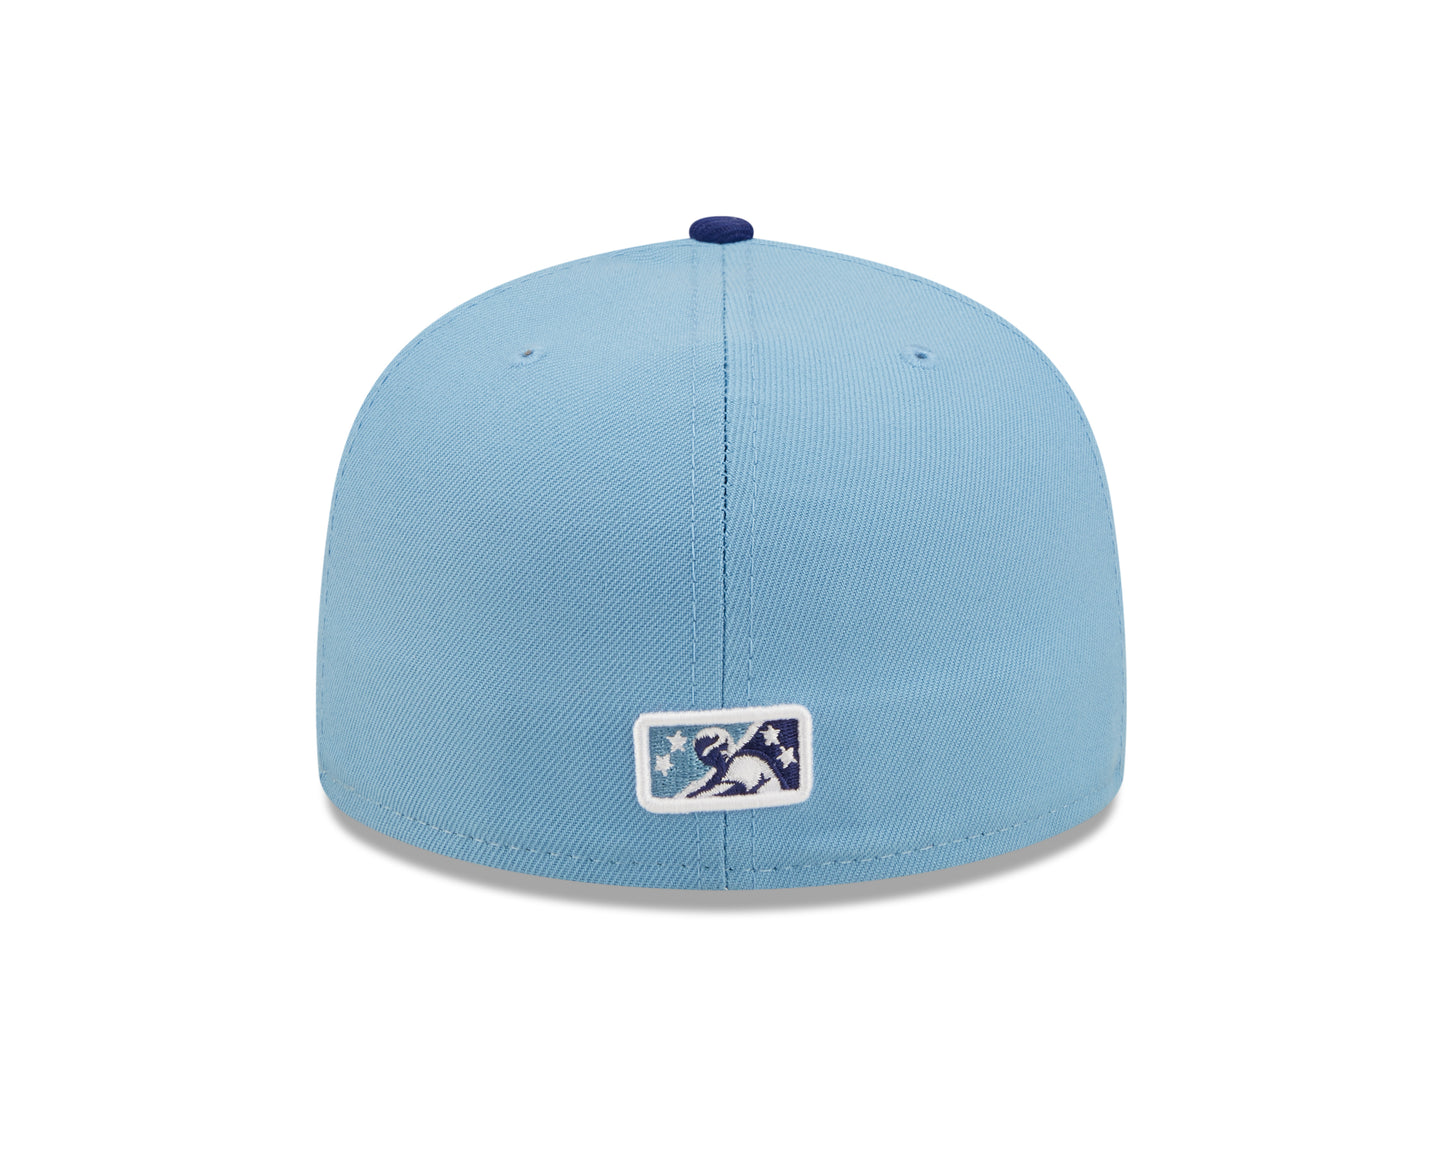 New Era - 59fifty Fitted - MiLB - AC Perf - Buffalo Bisons - White/Blue - Headz Up 